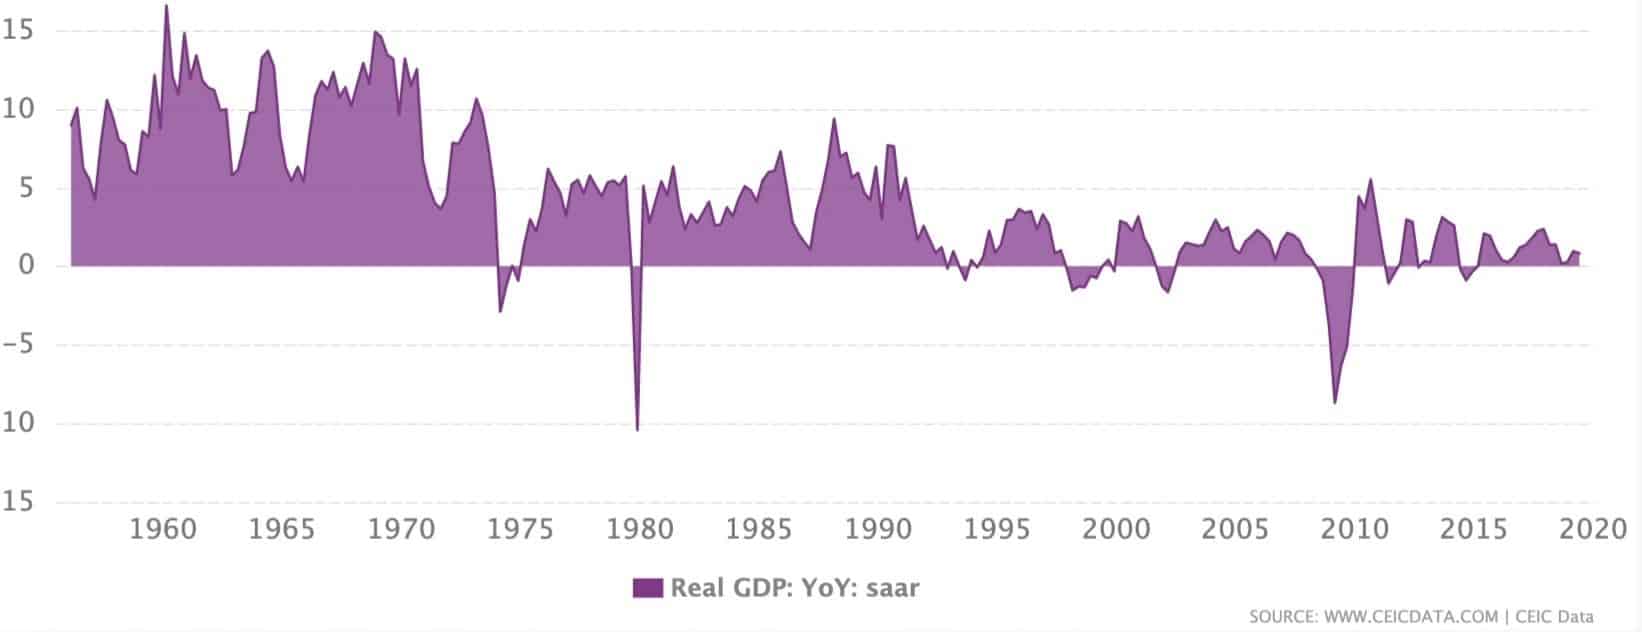 Japan’s real growth since 1990